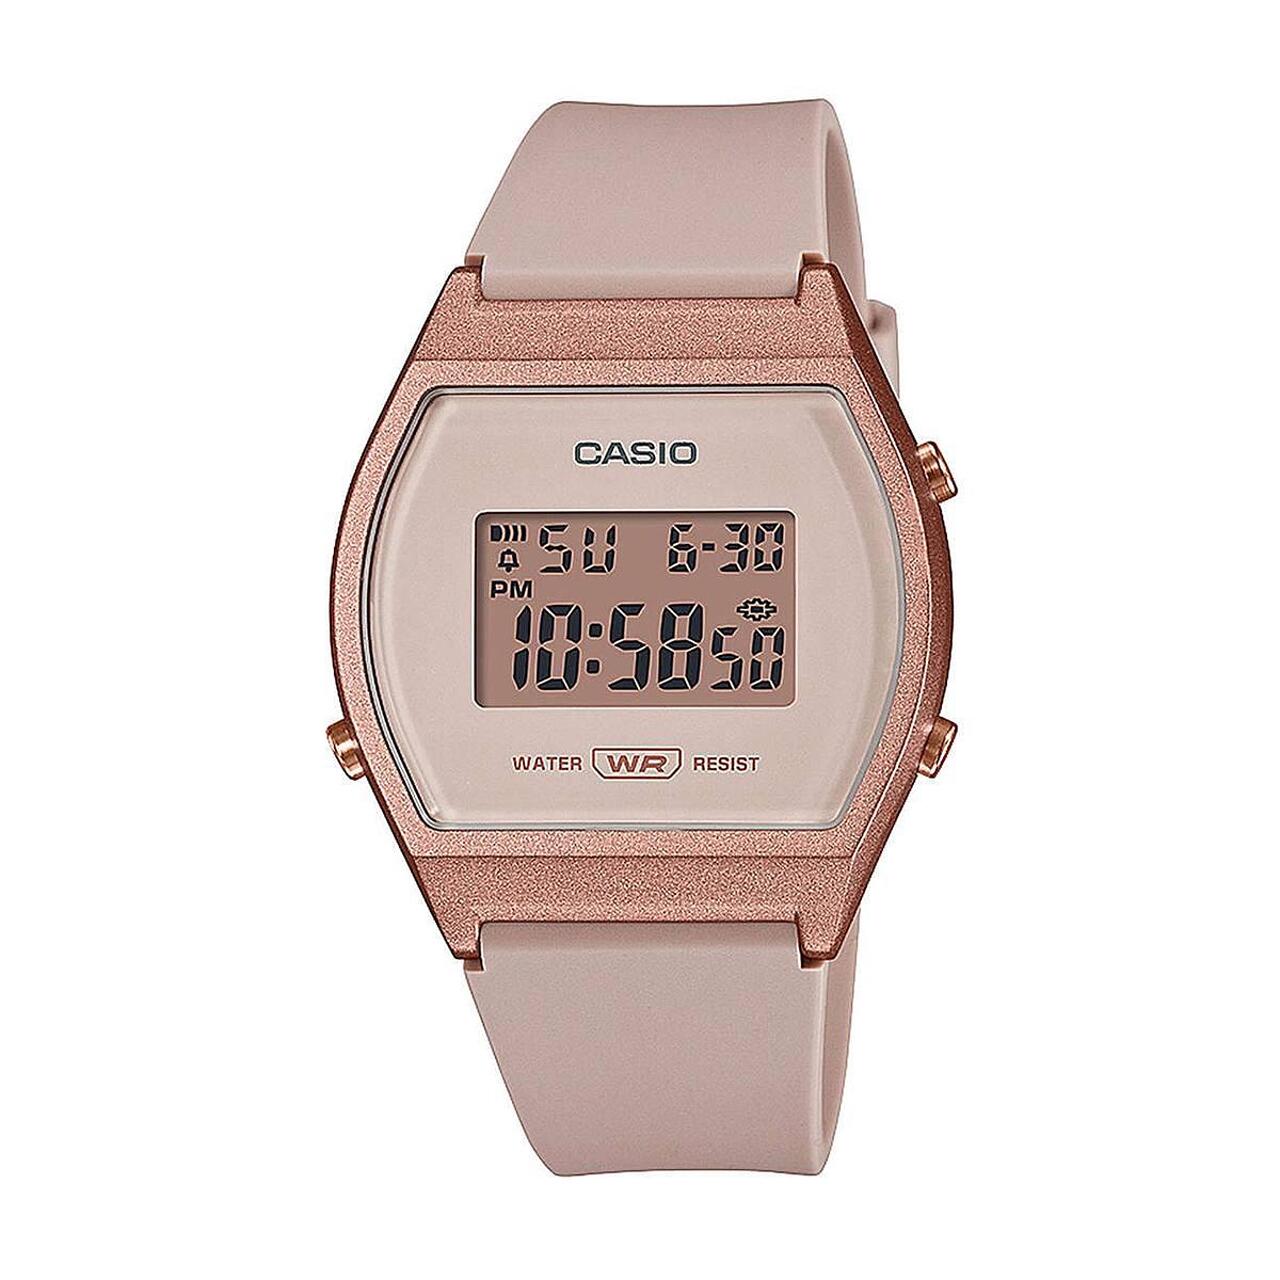 Casio Collection LW-204-4AEF